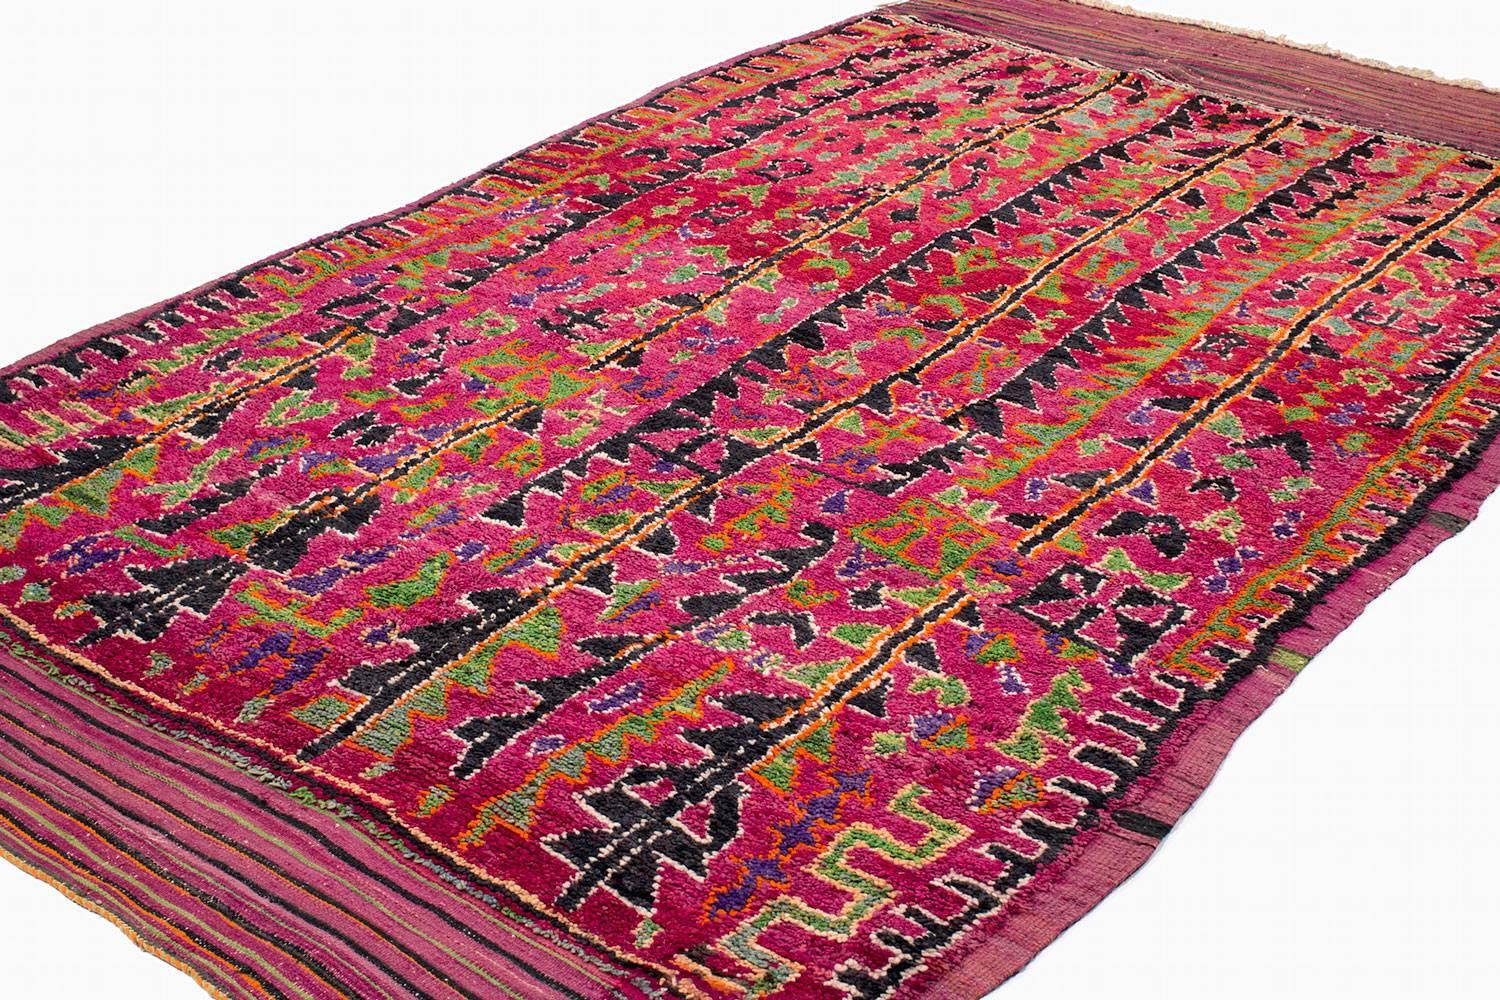 This vibrant one-of-a-kind Moroccan rug has a great vintage feeling. Various shades of magenta, fuchsia and red create the bold field of the rug. Energetic triangles, diamonds and abstract shapes are woven in inky blue, turquoise, lime green, berry